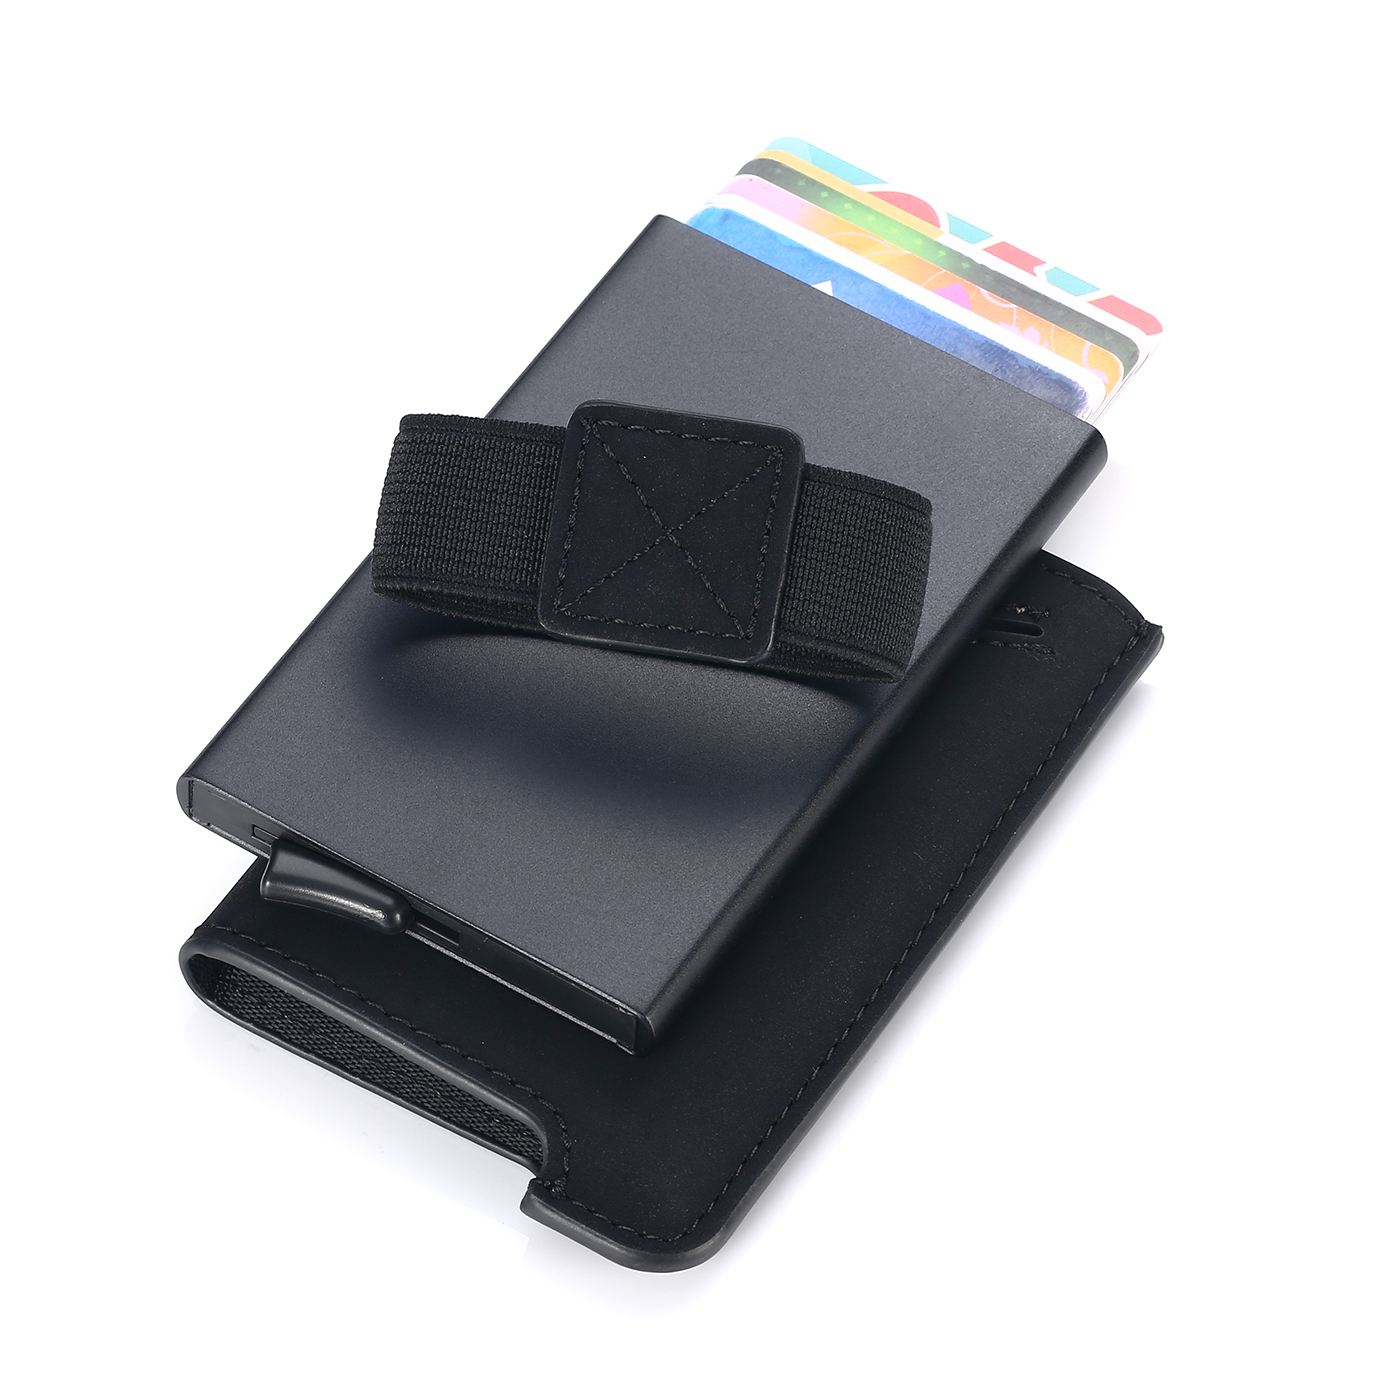 2020 Hotsale Factory OEM Rfid Blocking Small Wallet Aluminum Pop up Credit Card Holder with Money Clips for Women and Men